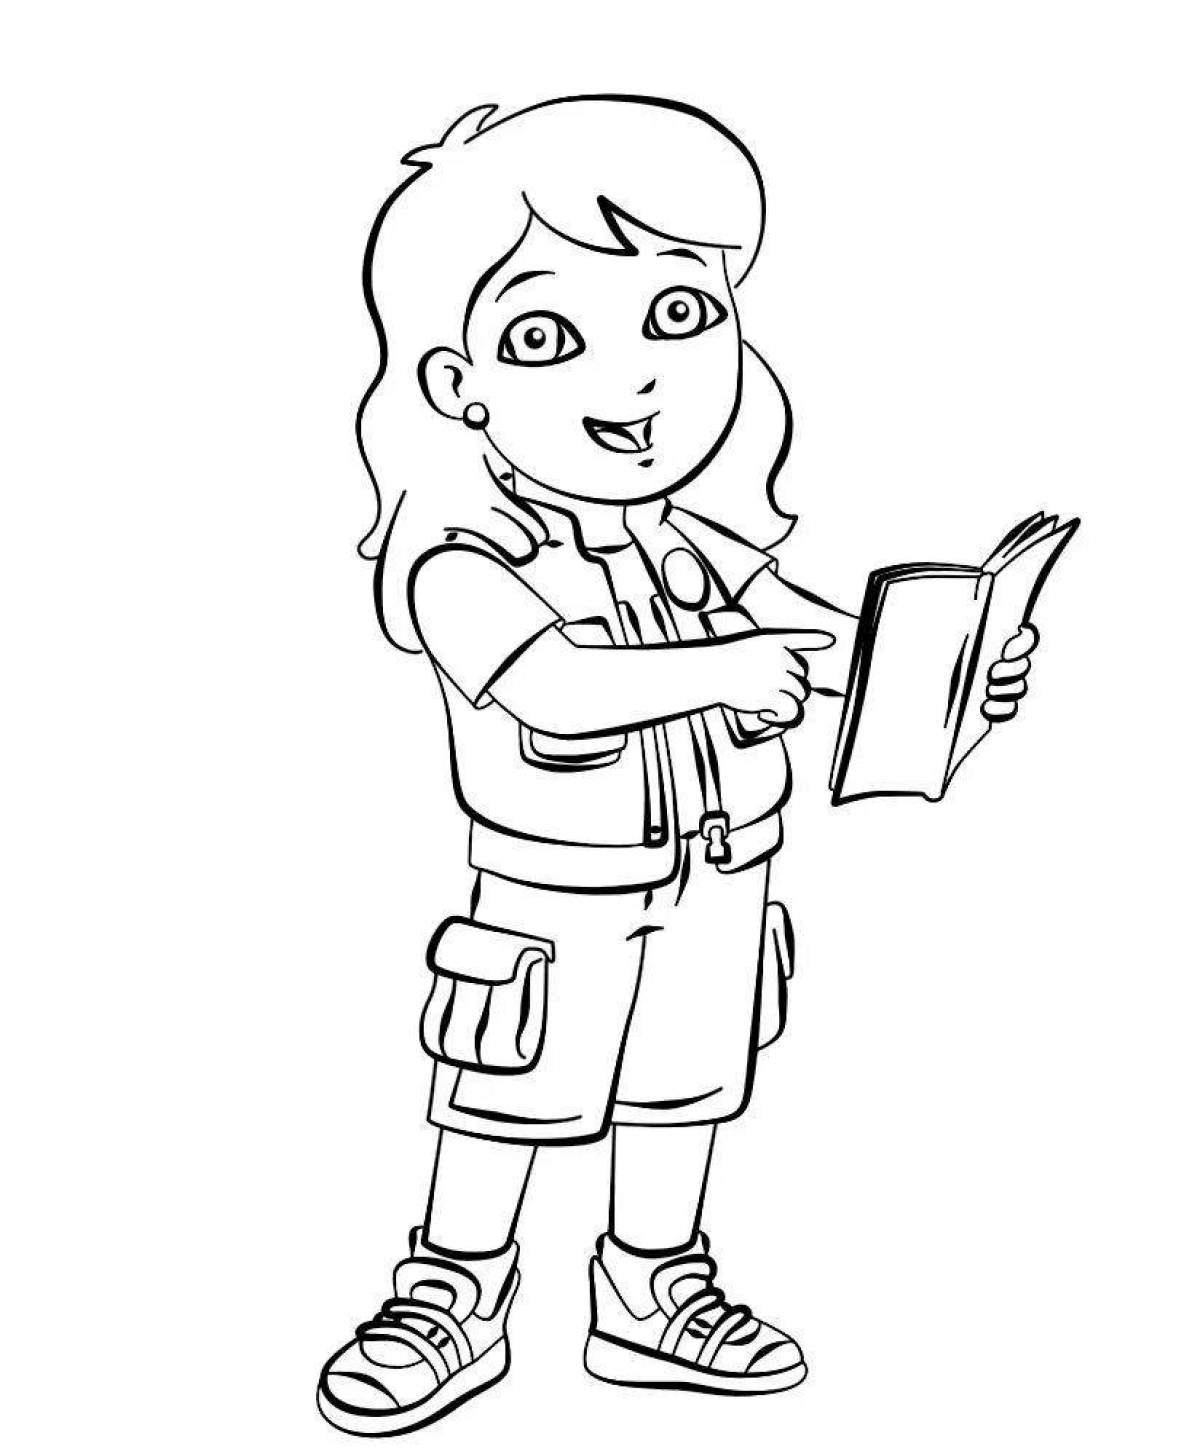 Coloring page cheerful tourist